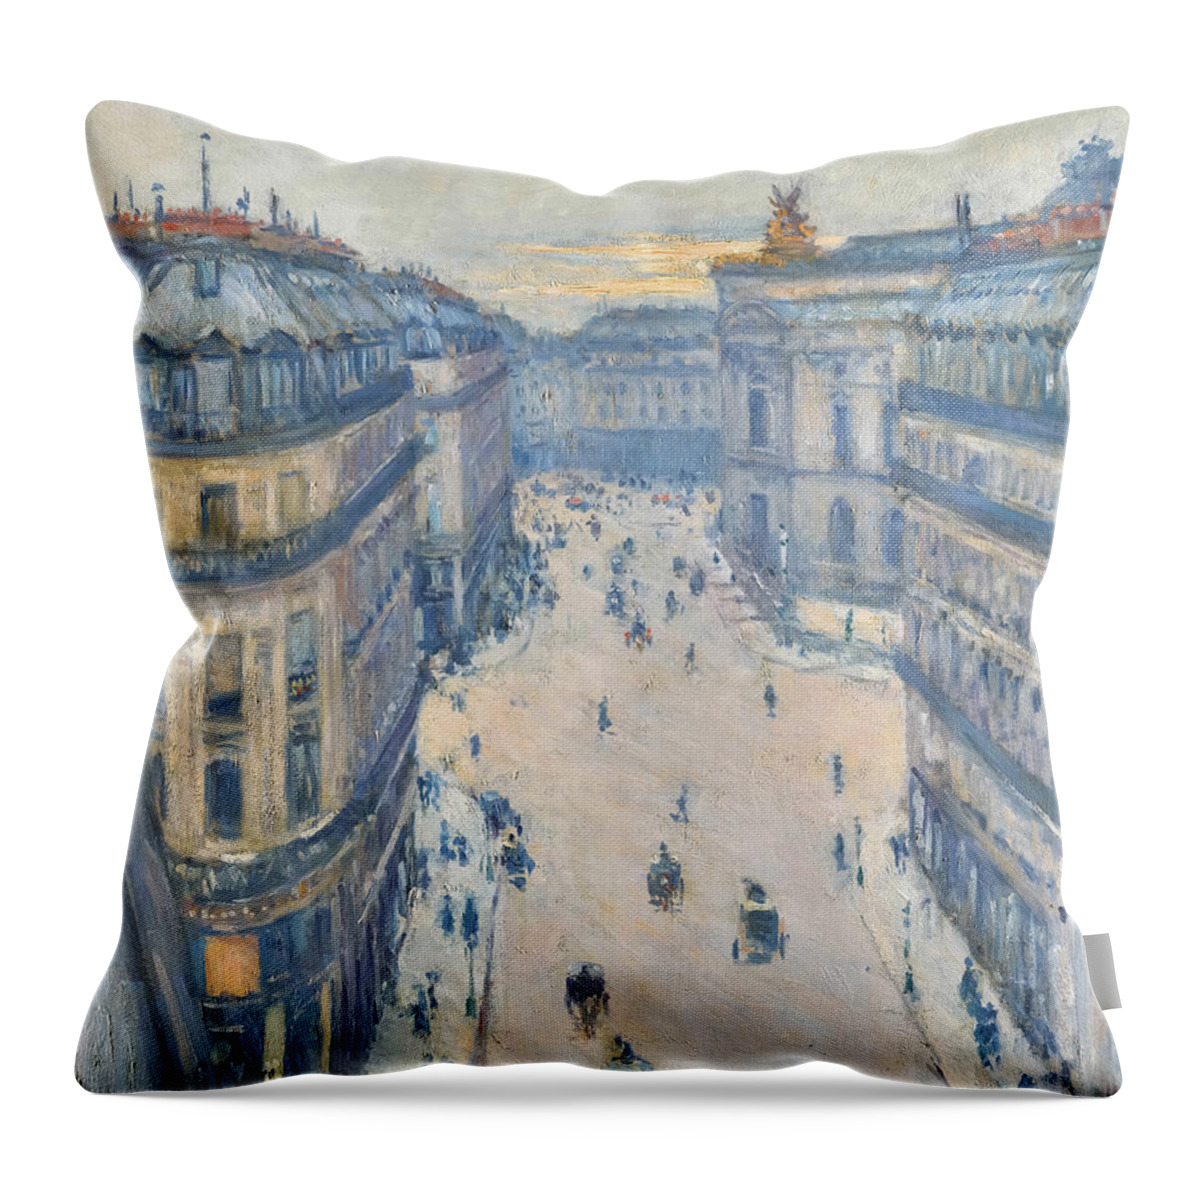 Halevy Street Throw Pillow featuring the painting Halevy Street by Gustave Caillebotte by Mango Art